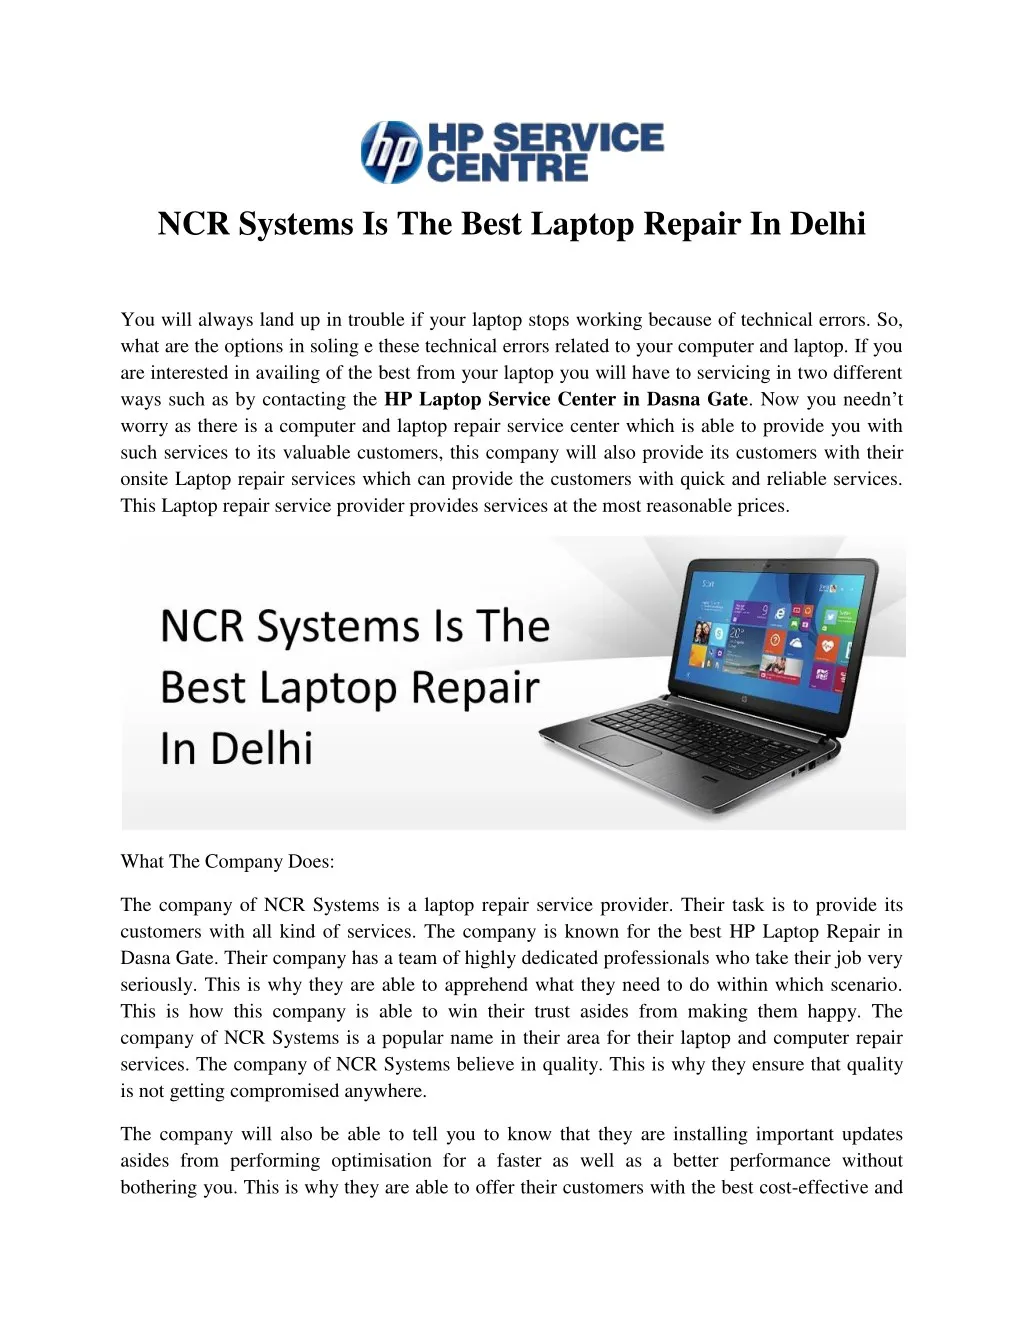 ncr systems is the best laptop repair in delhi